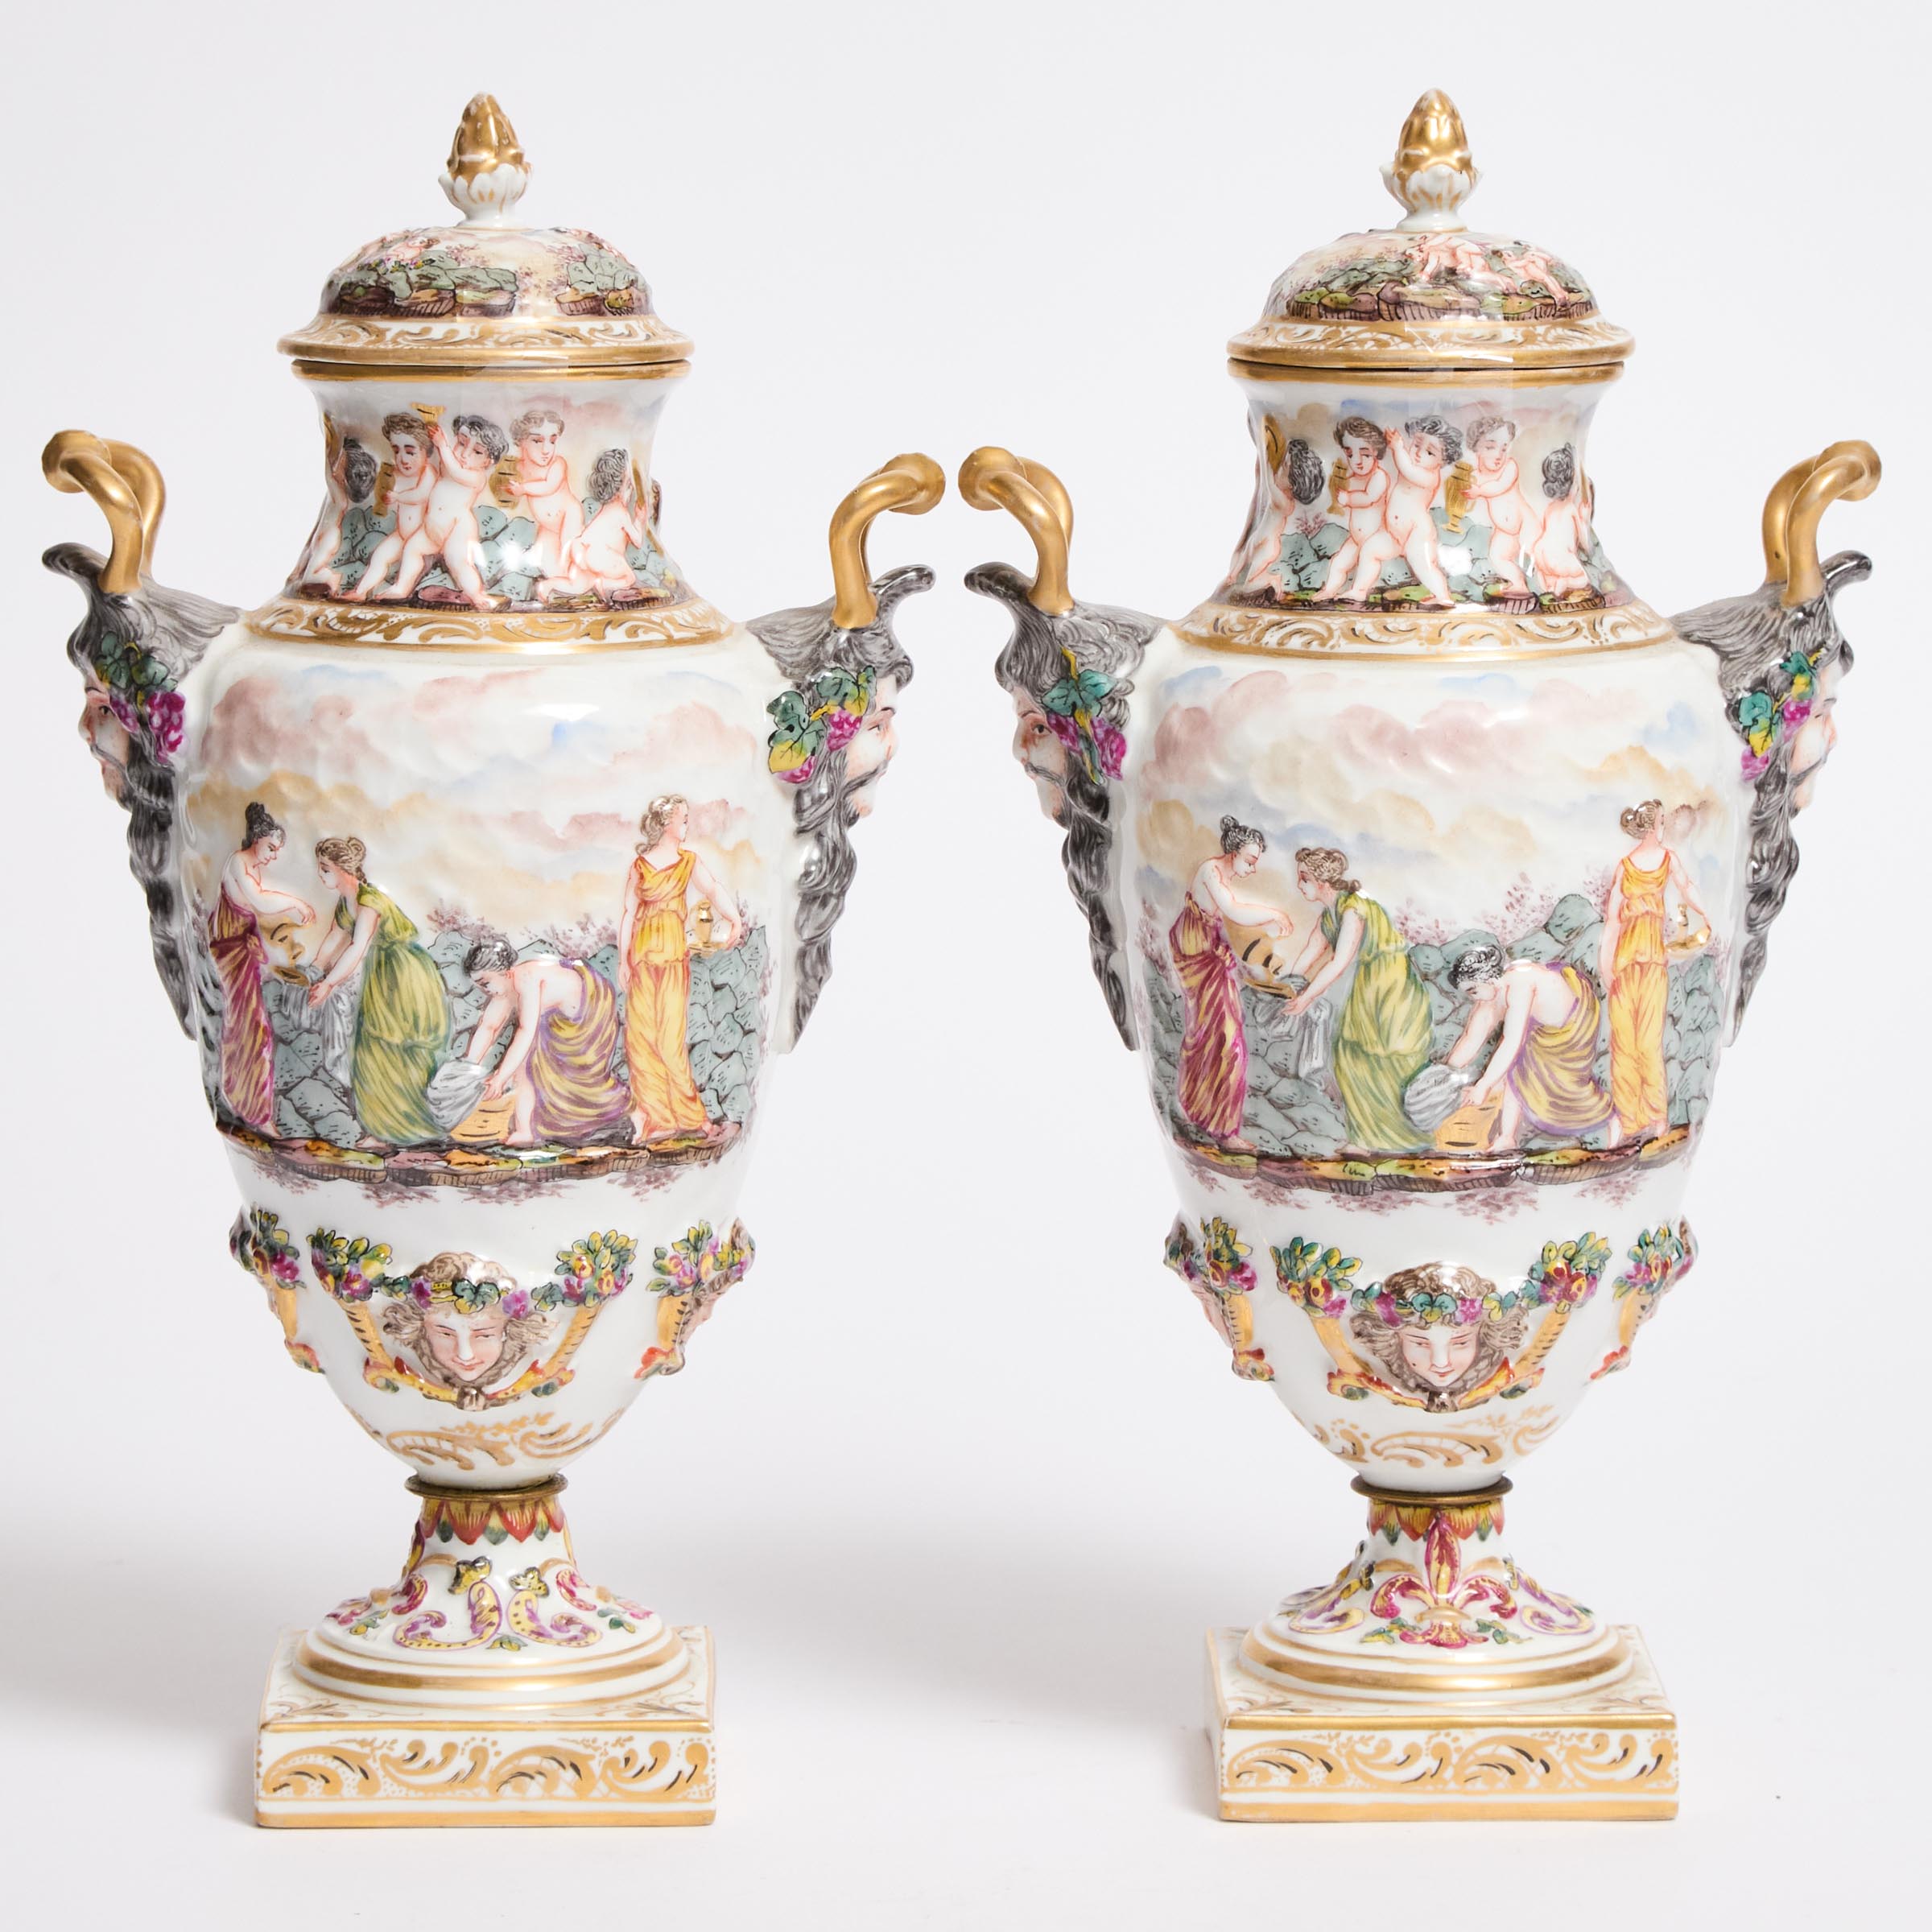 Pair of Naples Porcelain Covered 2fb046a